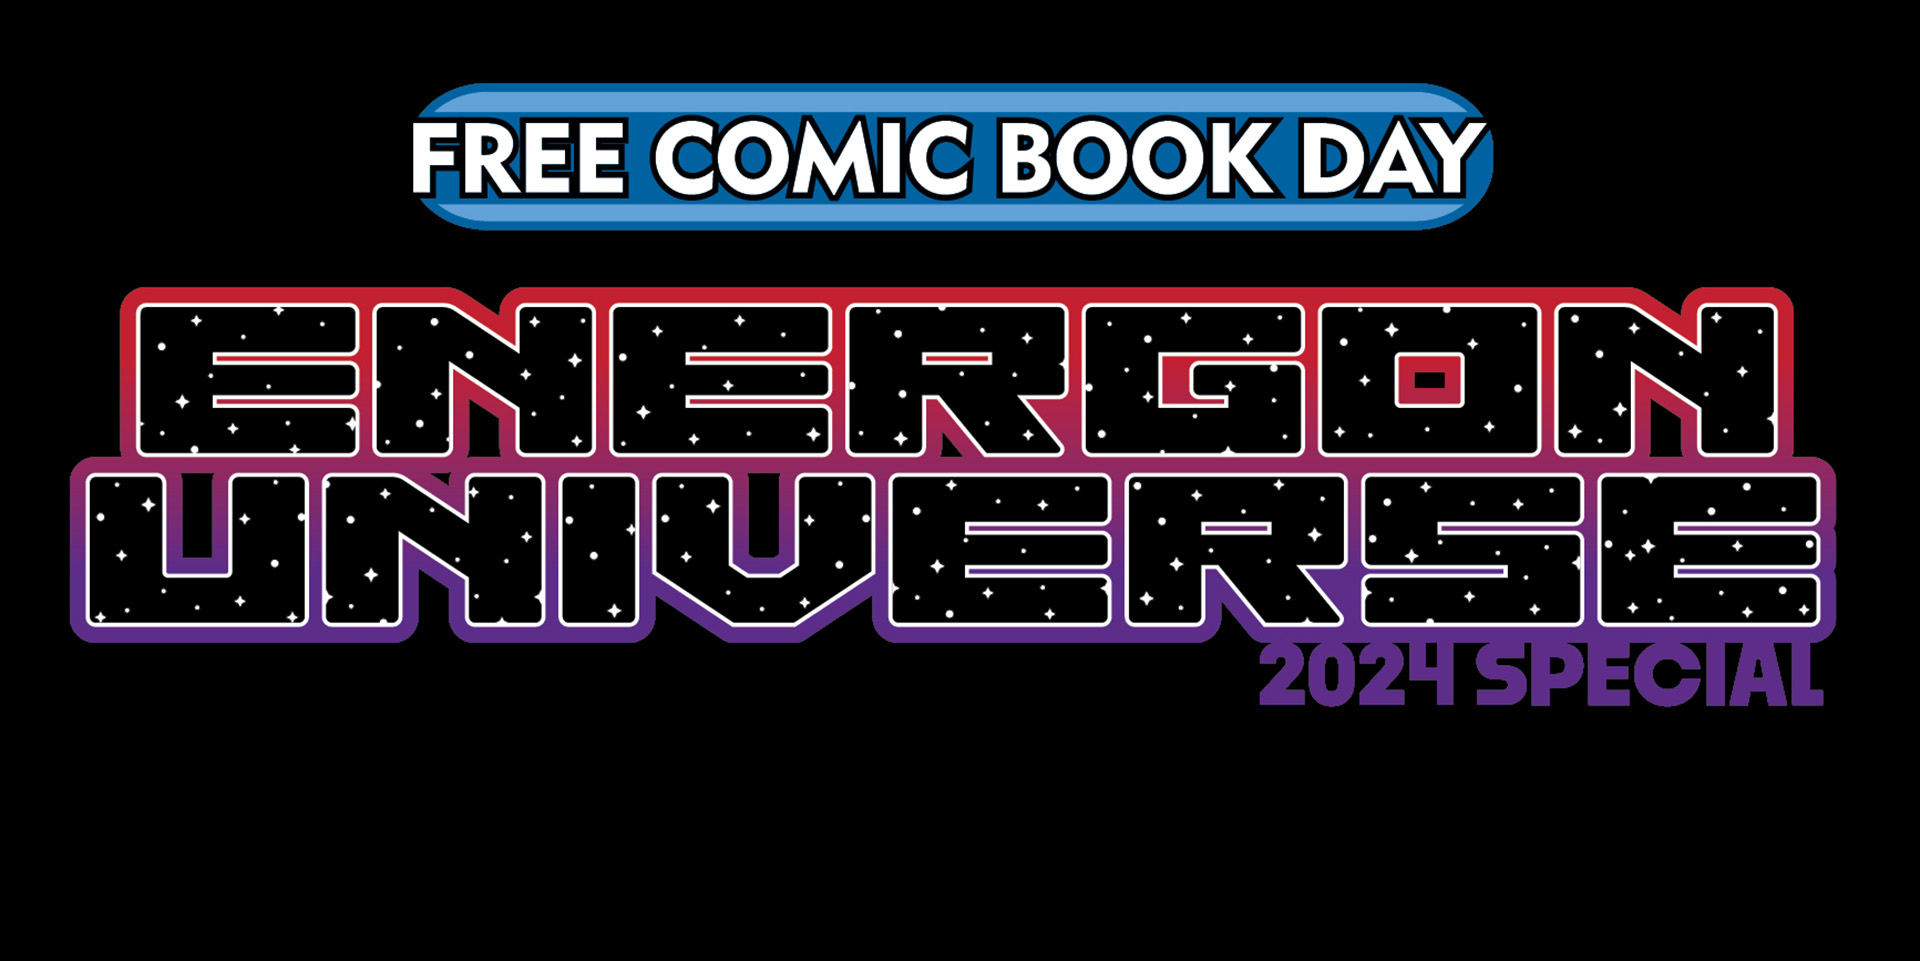 SKYBOUND AND HASBRO ANNOUNCE ENERGON UNIVERSE SPECIAL FOR FREE COMIC BOOK DAY 2024